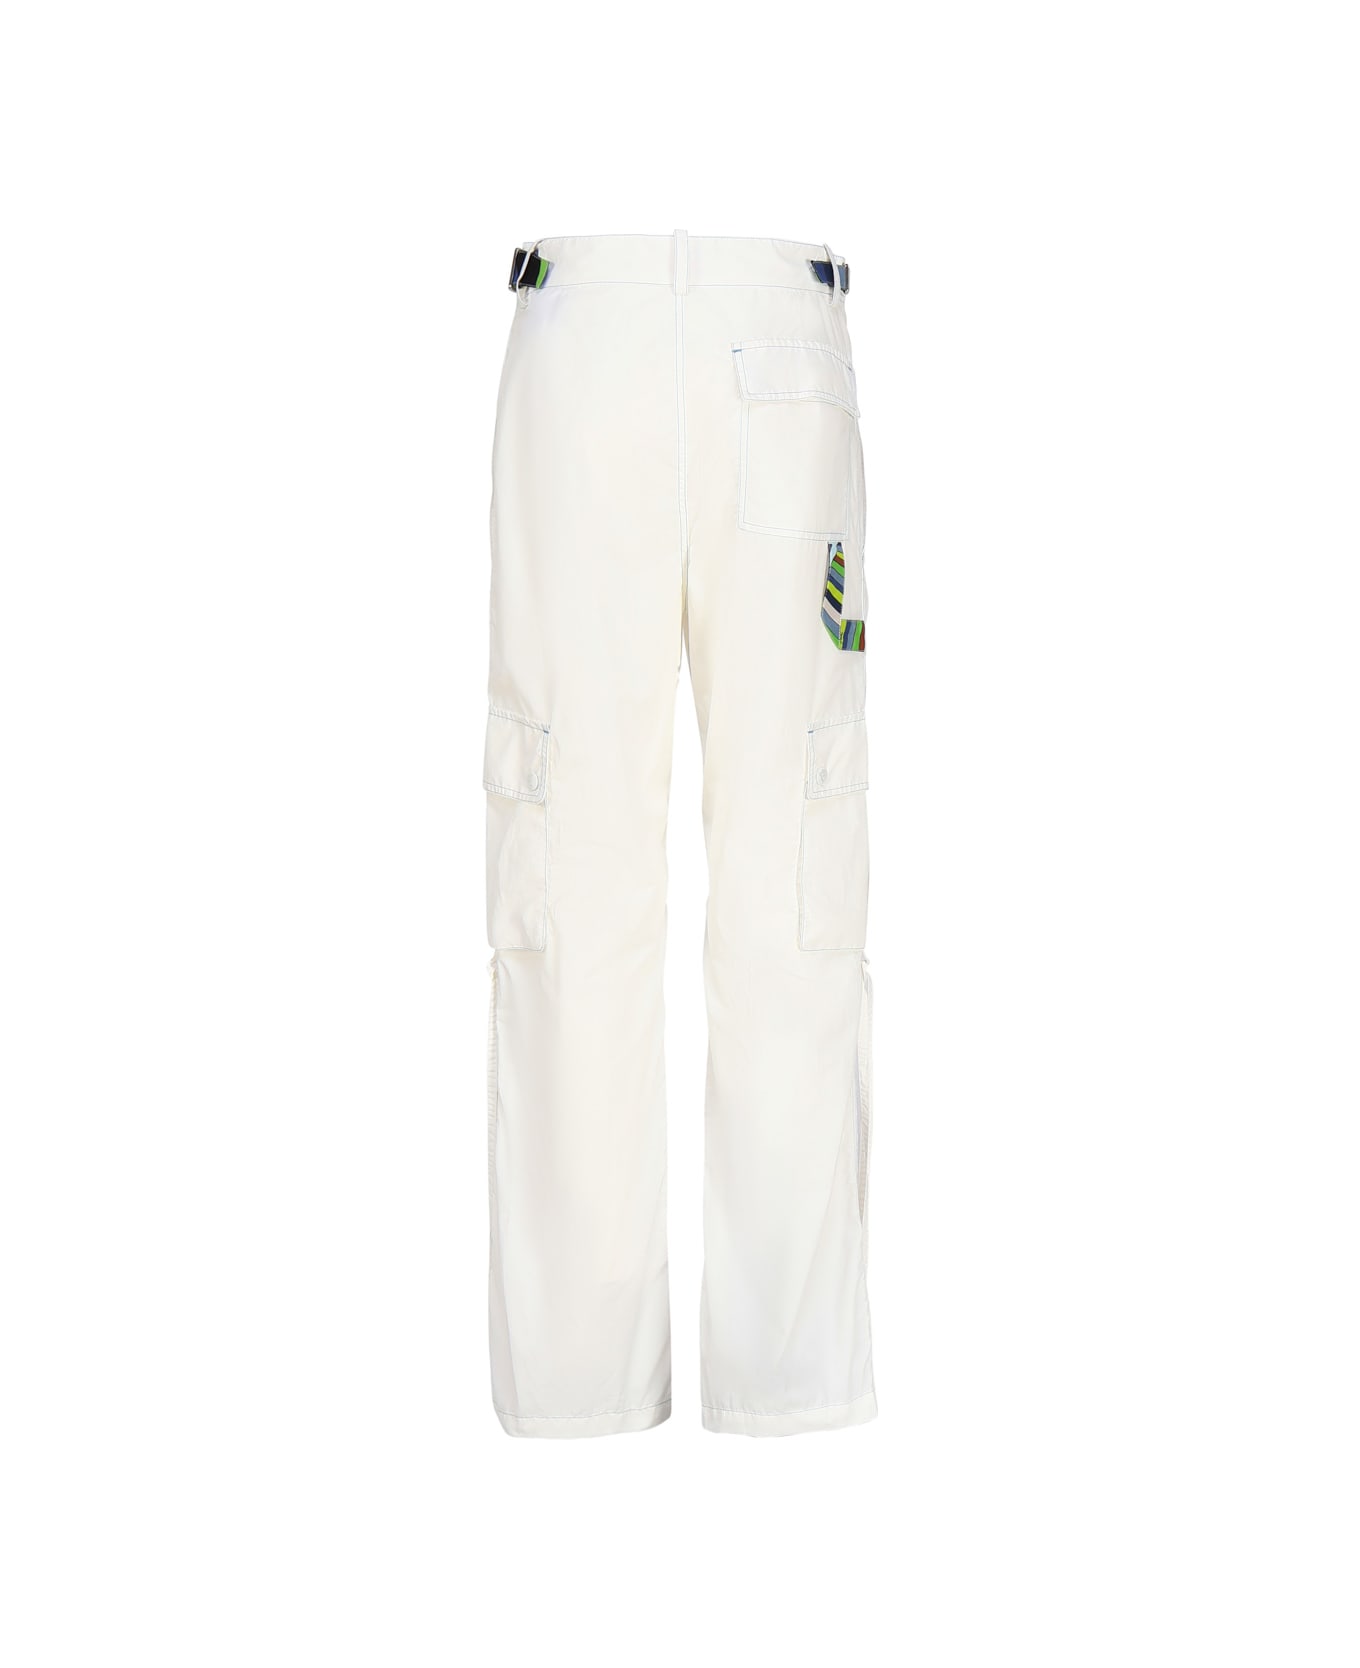 Pucci Iride Cargo Trousers - White ボトムス